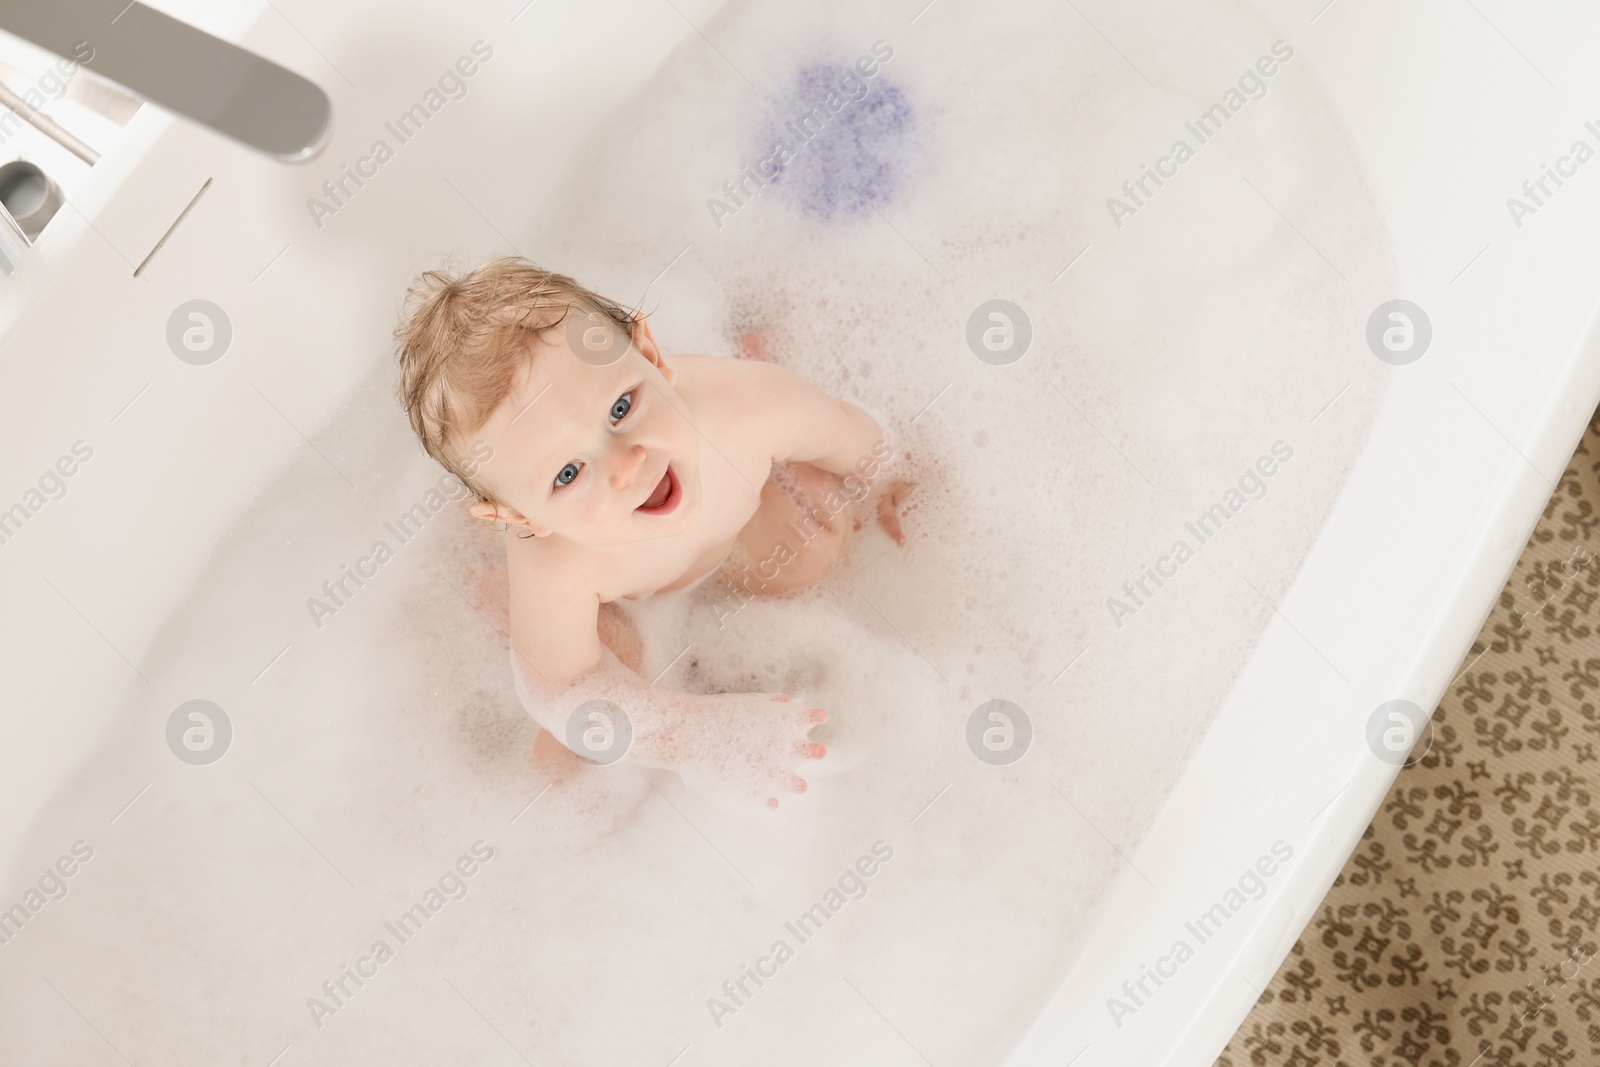 Photo of Cute little baby bathing in tub at home, top view